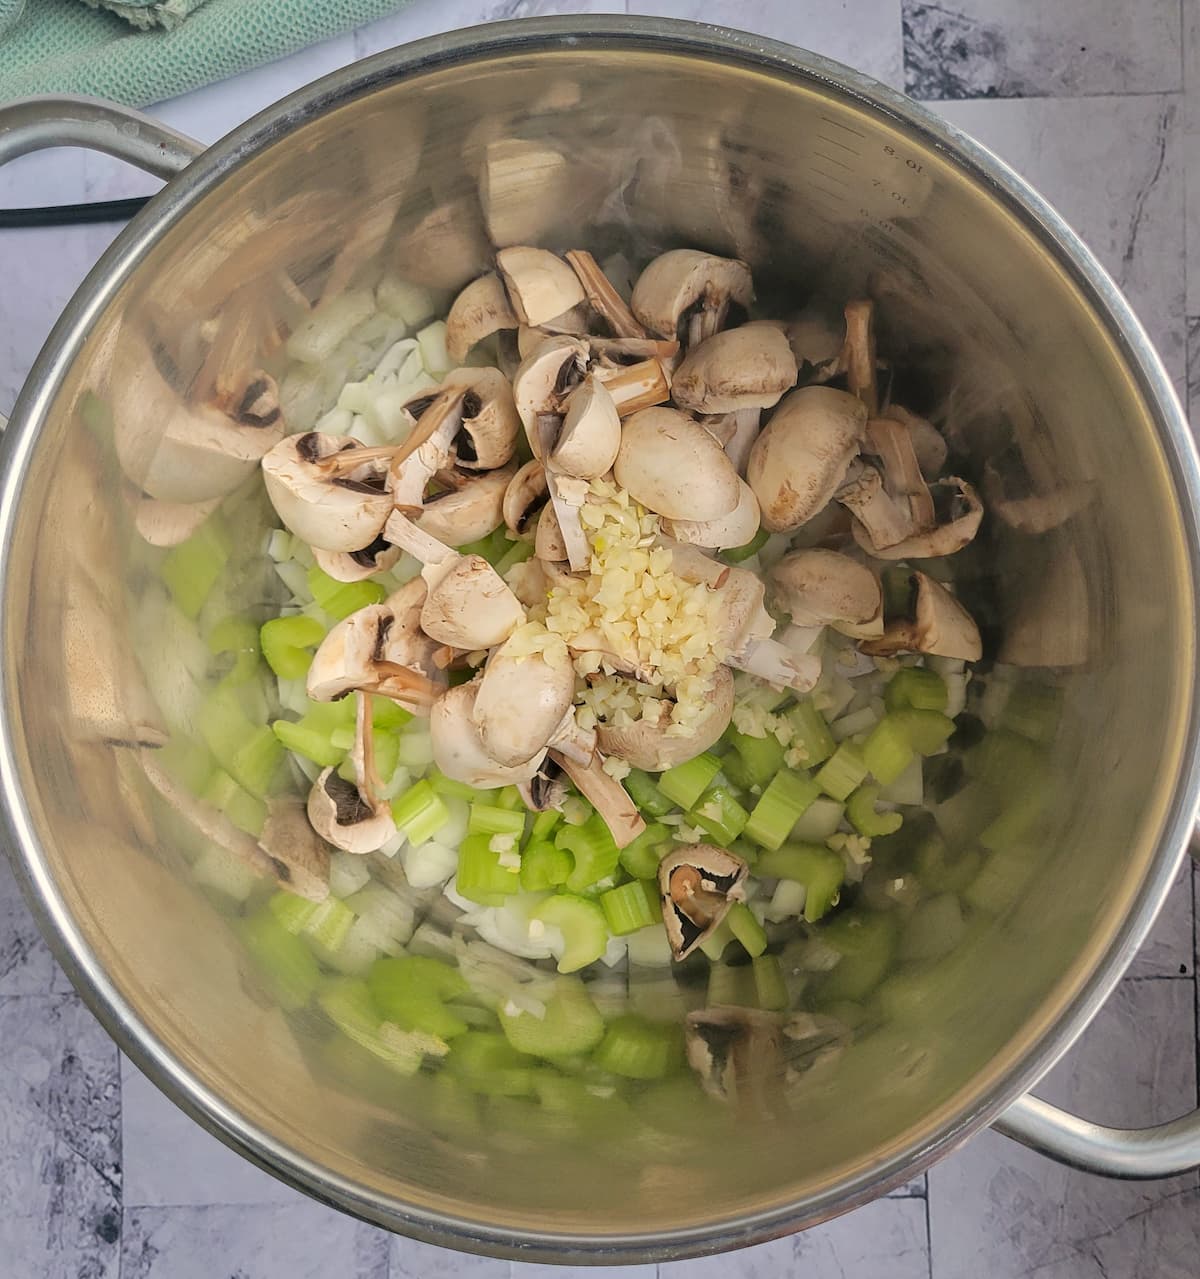 minced garlic, sliced mushrooms, diced onion and celery in a pot